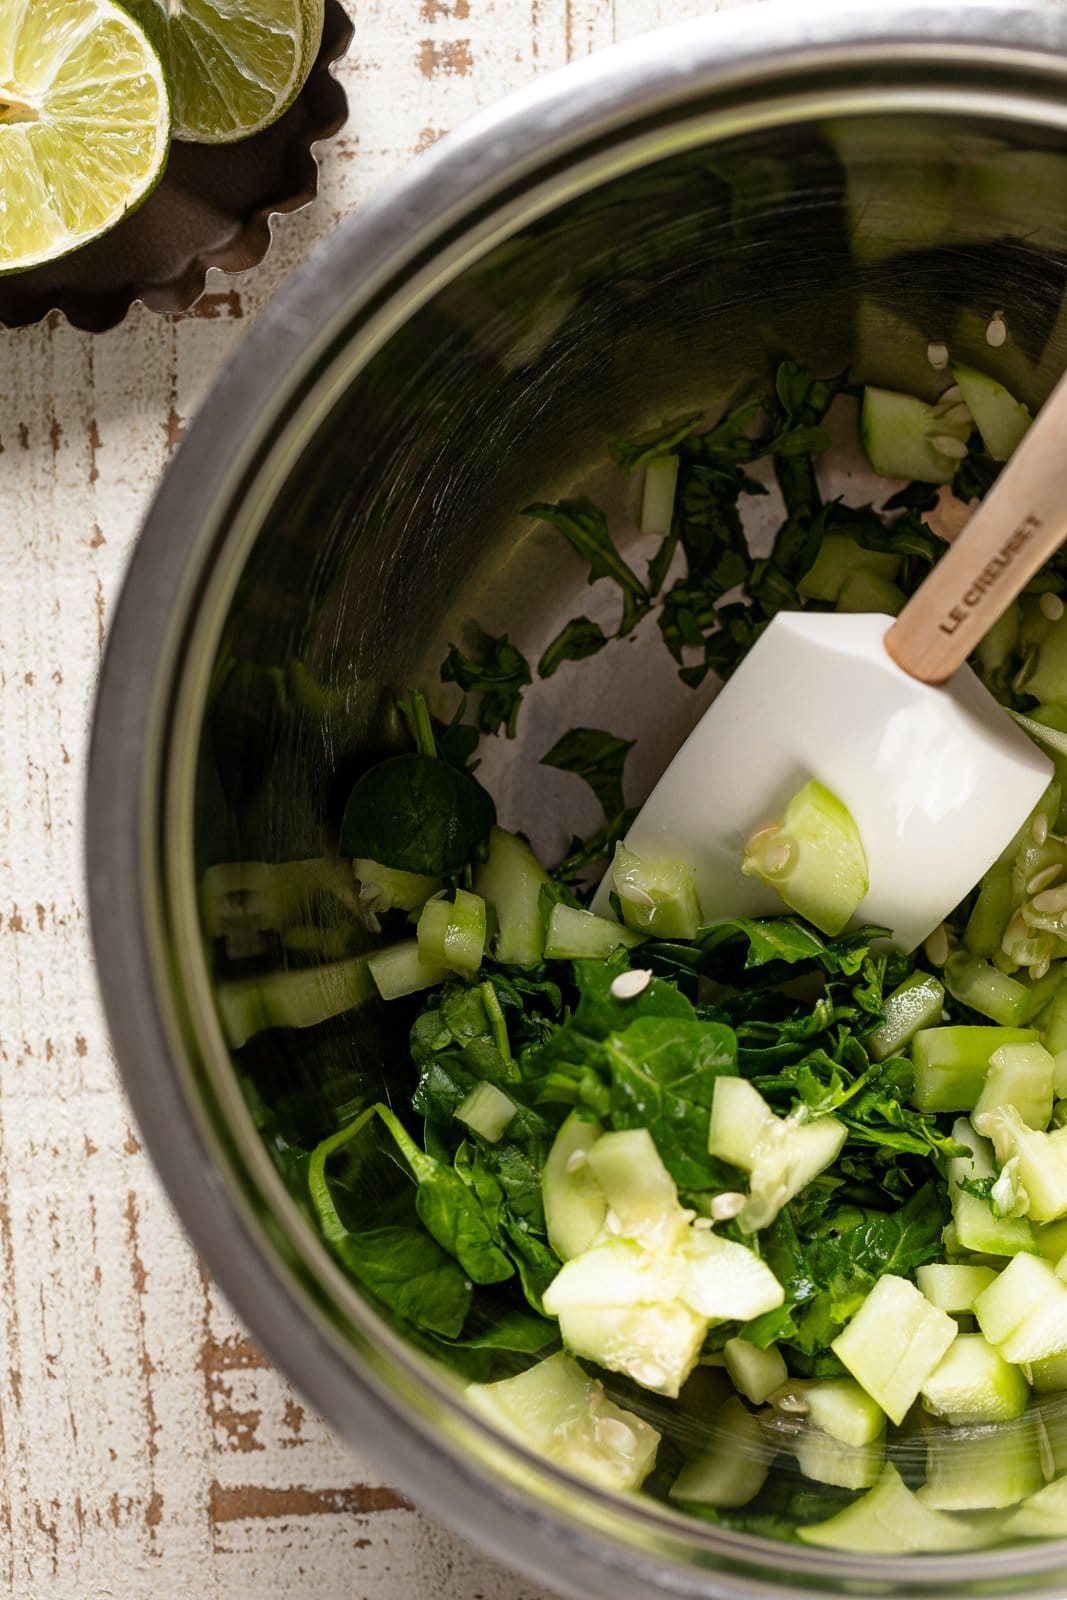 Chopped green produce being stirred in a bowl